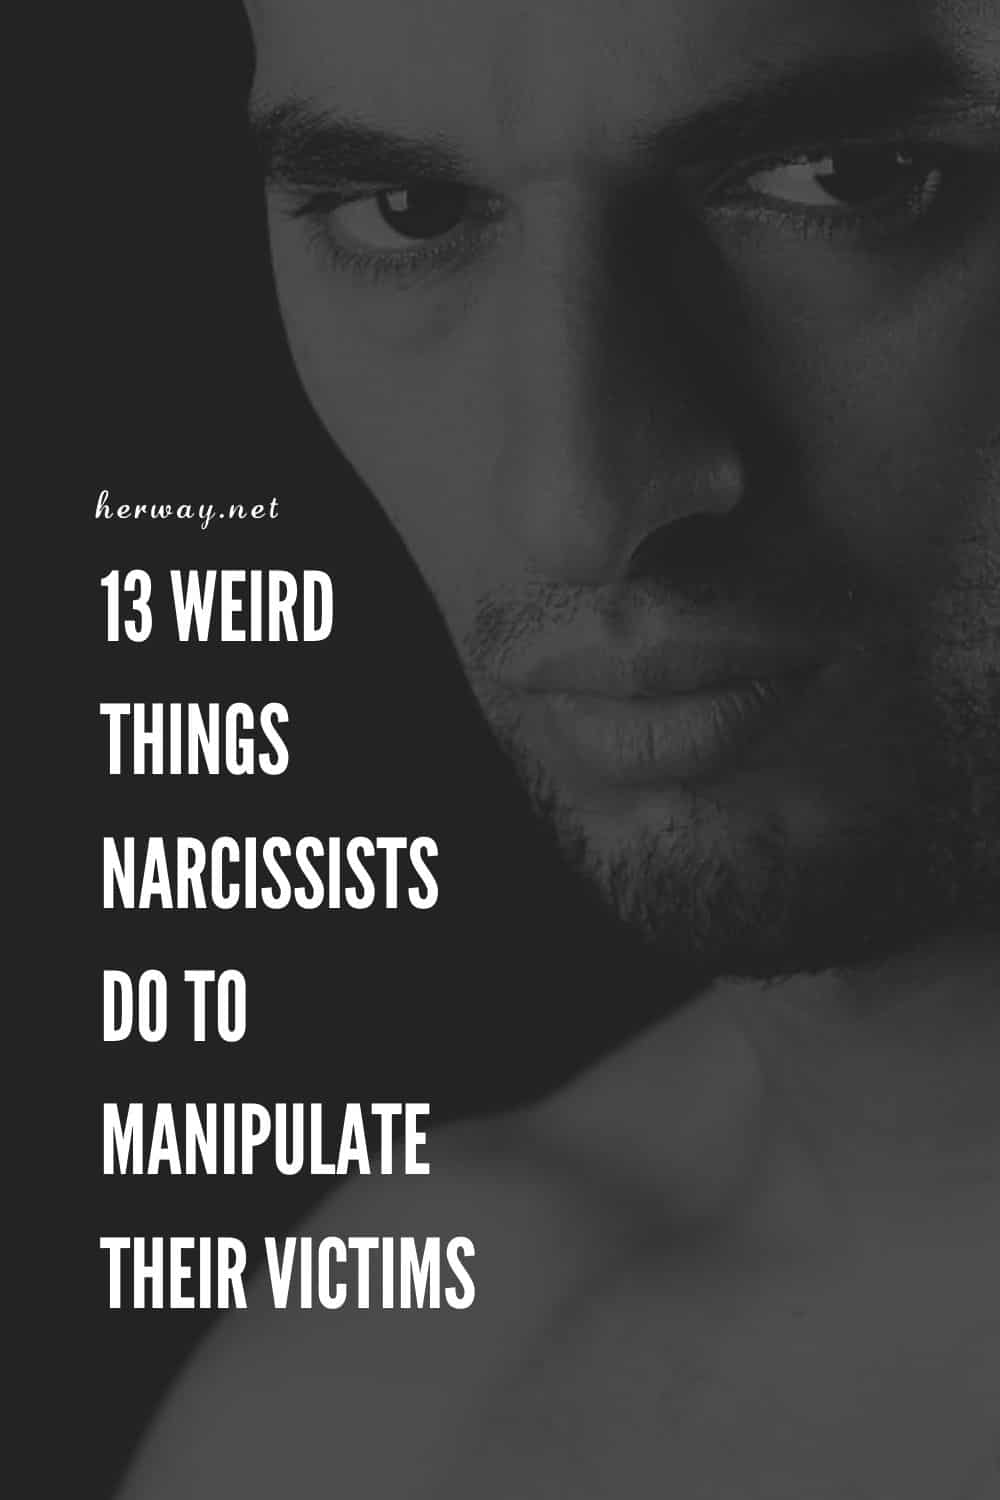 13 Weird Things Narcissists Do To Manipulate Their Victims